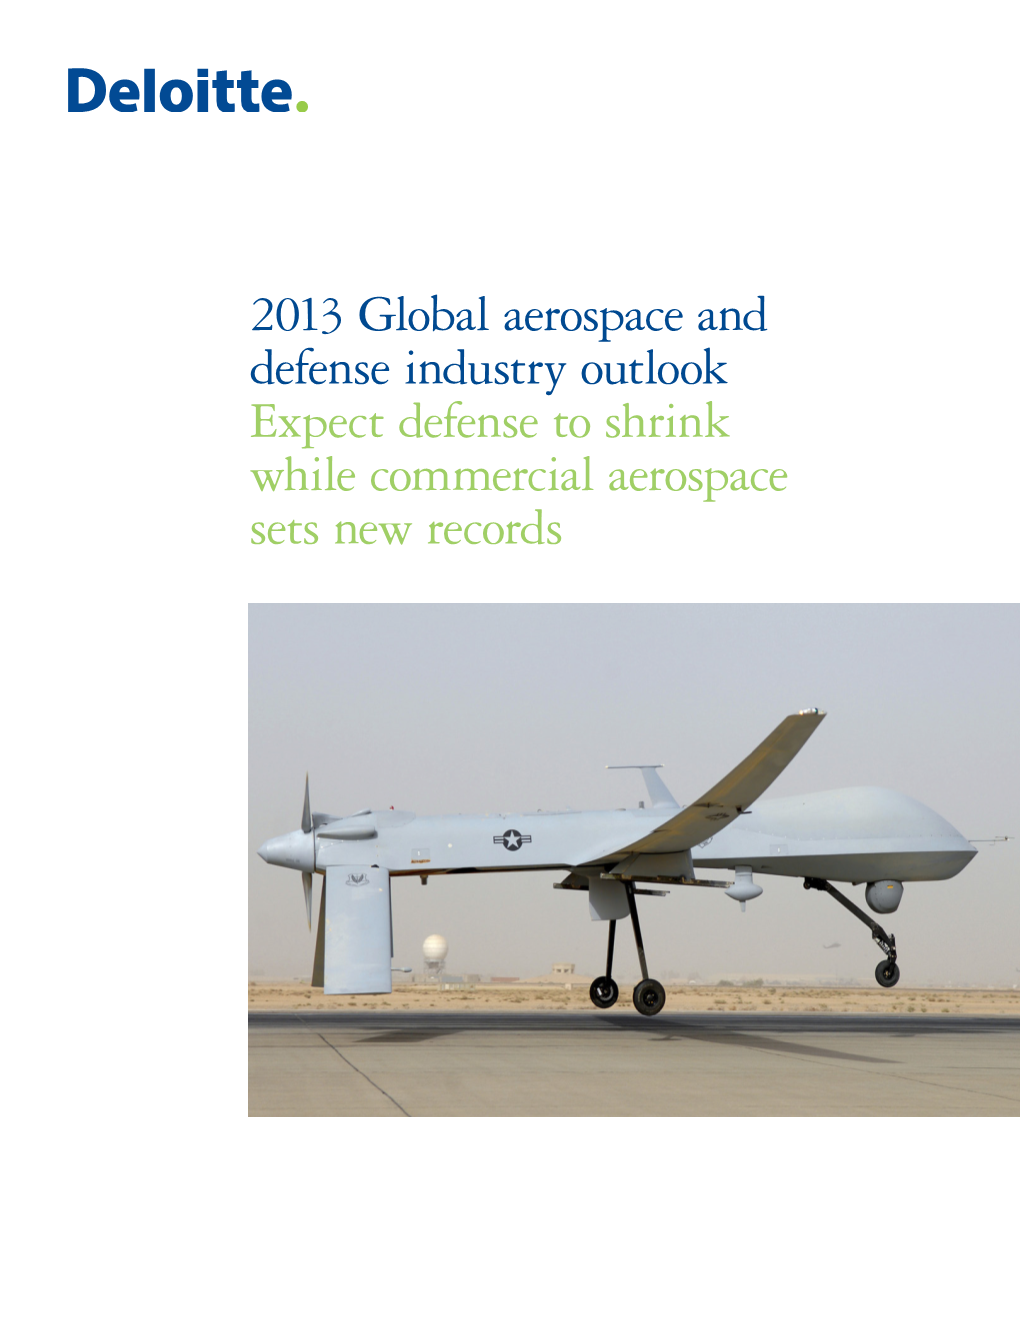 2013 Global Aerospace and Defense Industry Outlook Expect Defense to Shrink While Commercial Aerospace Sets New Records Contents